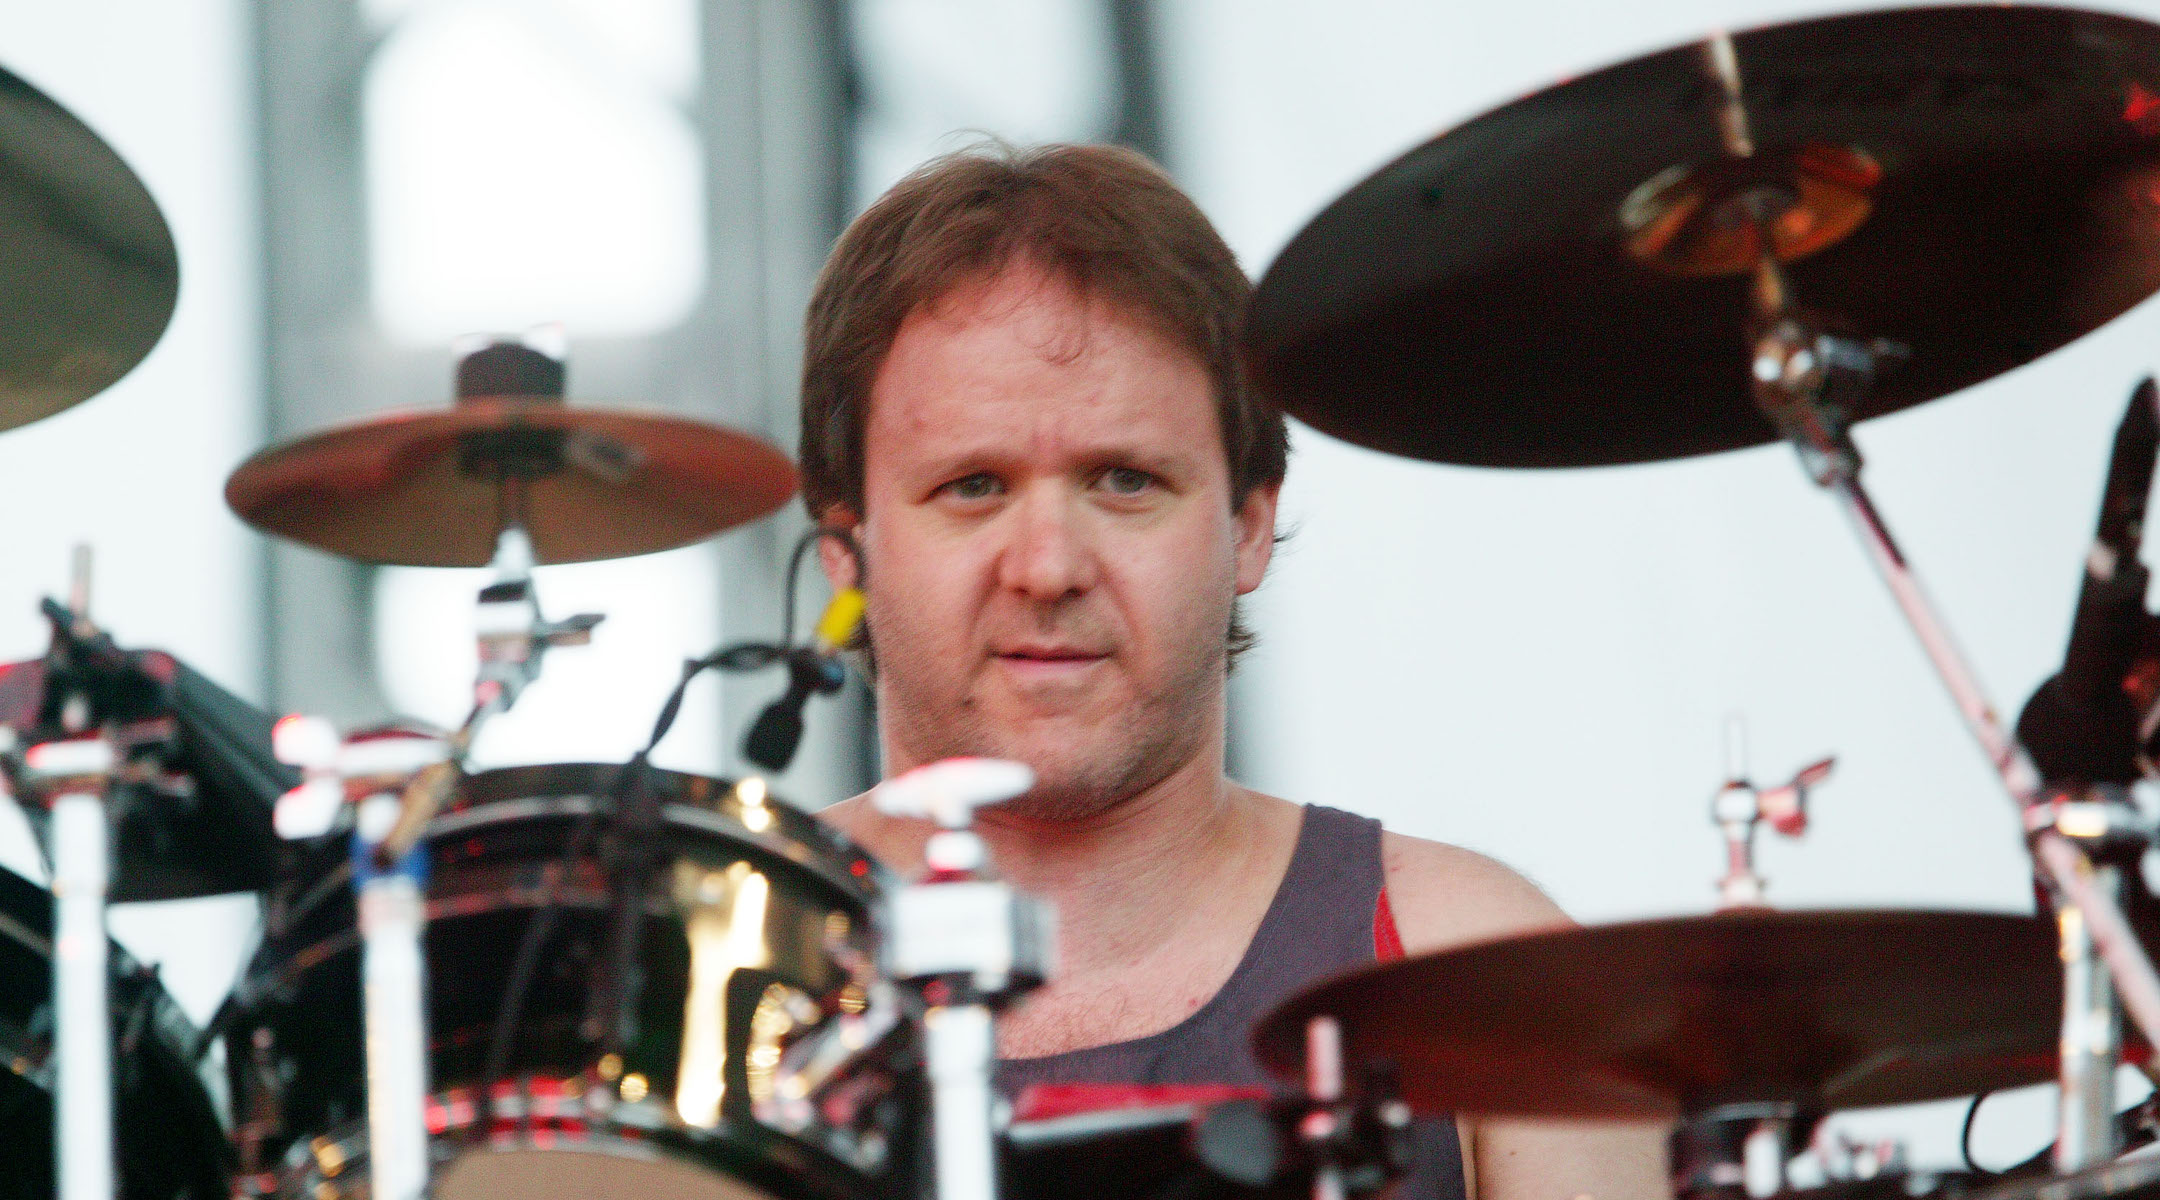 Phish drummer Jon Fishman, shown performing with the band in Brooklyn in 2004, is one of two Jewish members of the group. He’s known for performing in a colorful dress. (Scott Gries/Getty Images)